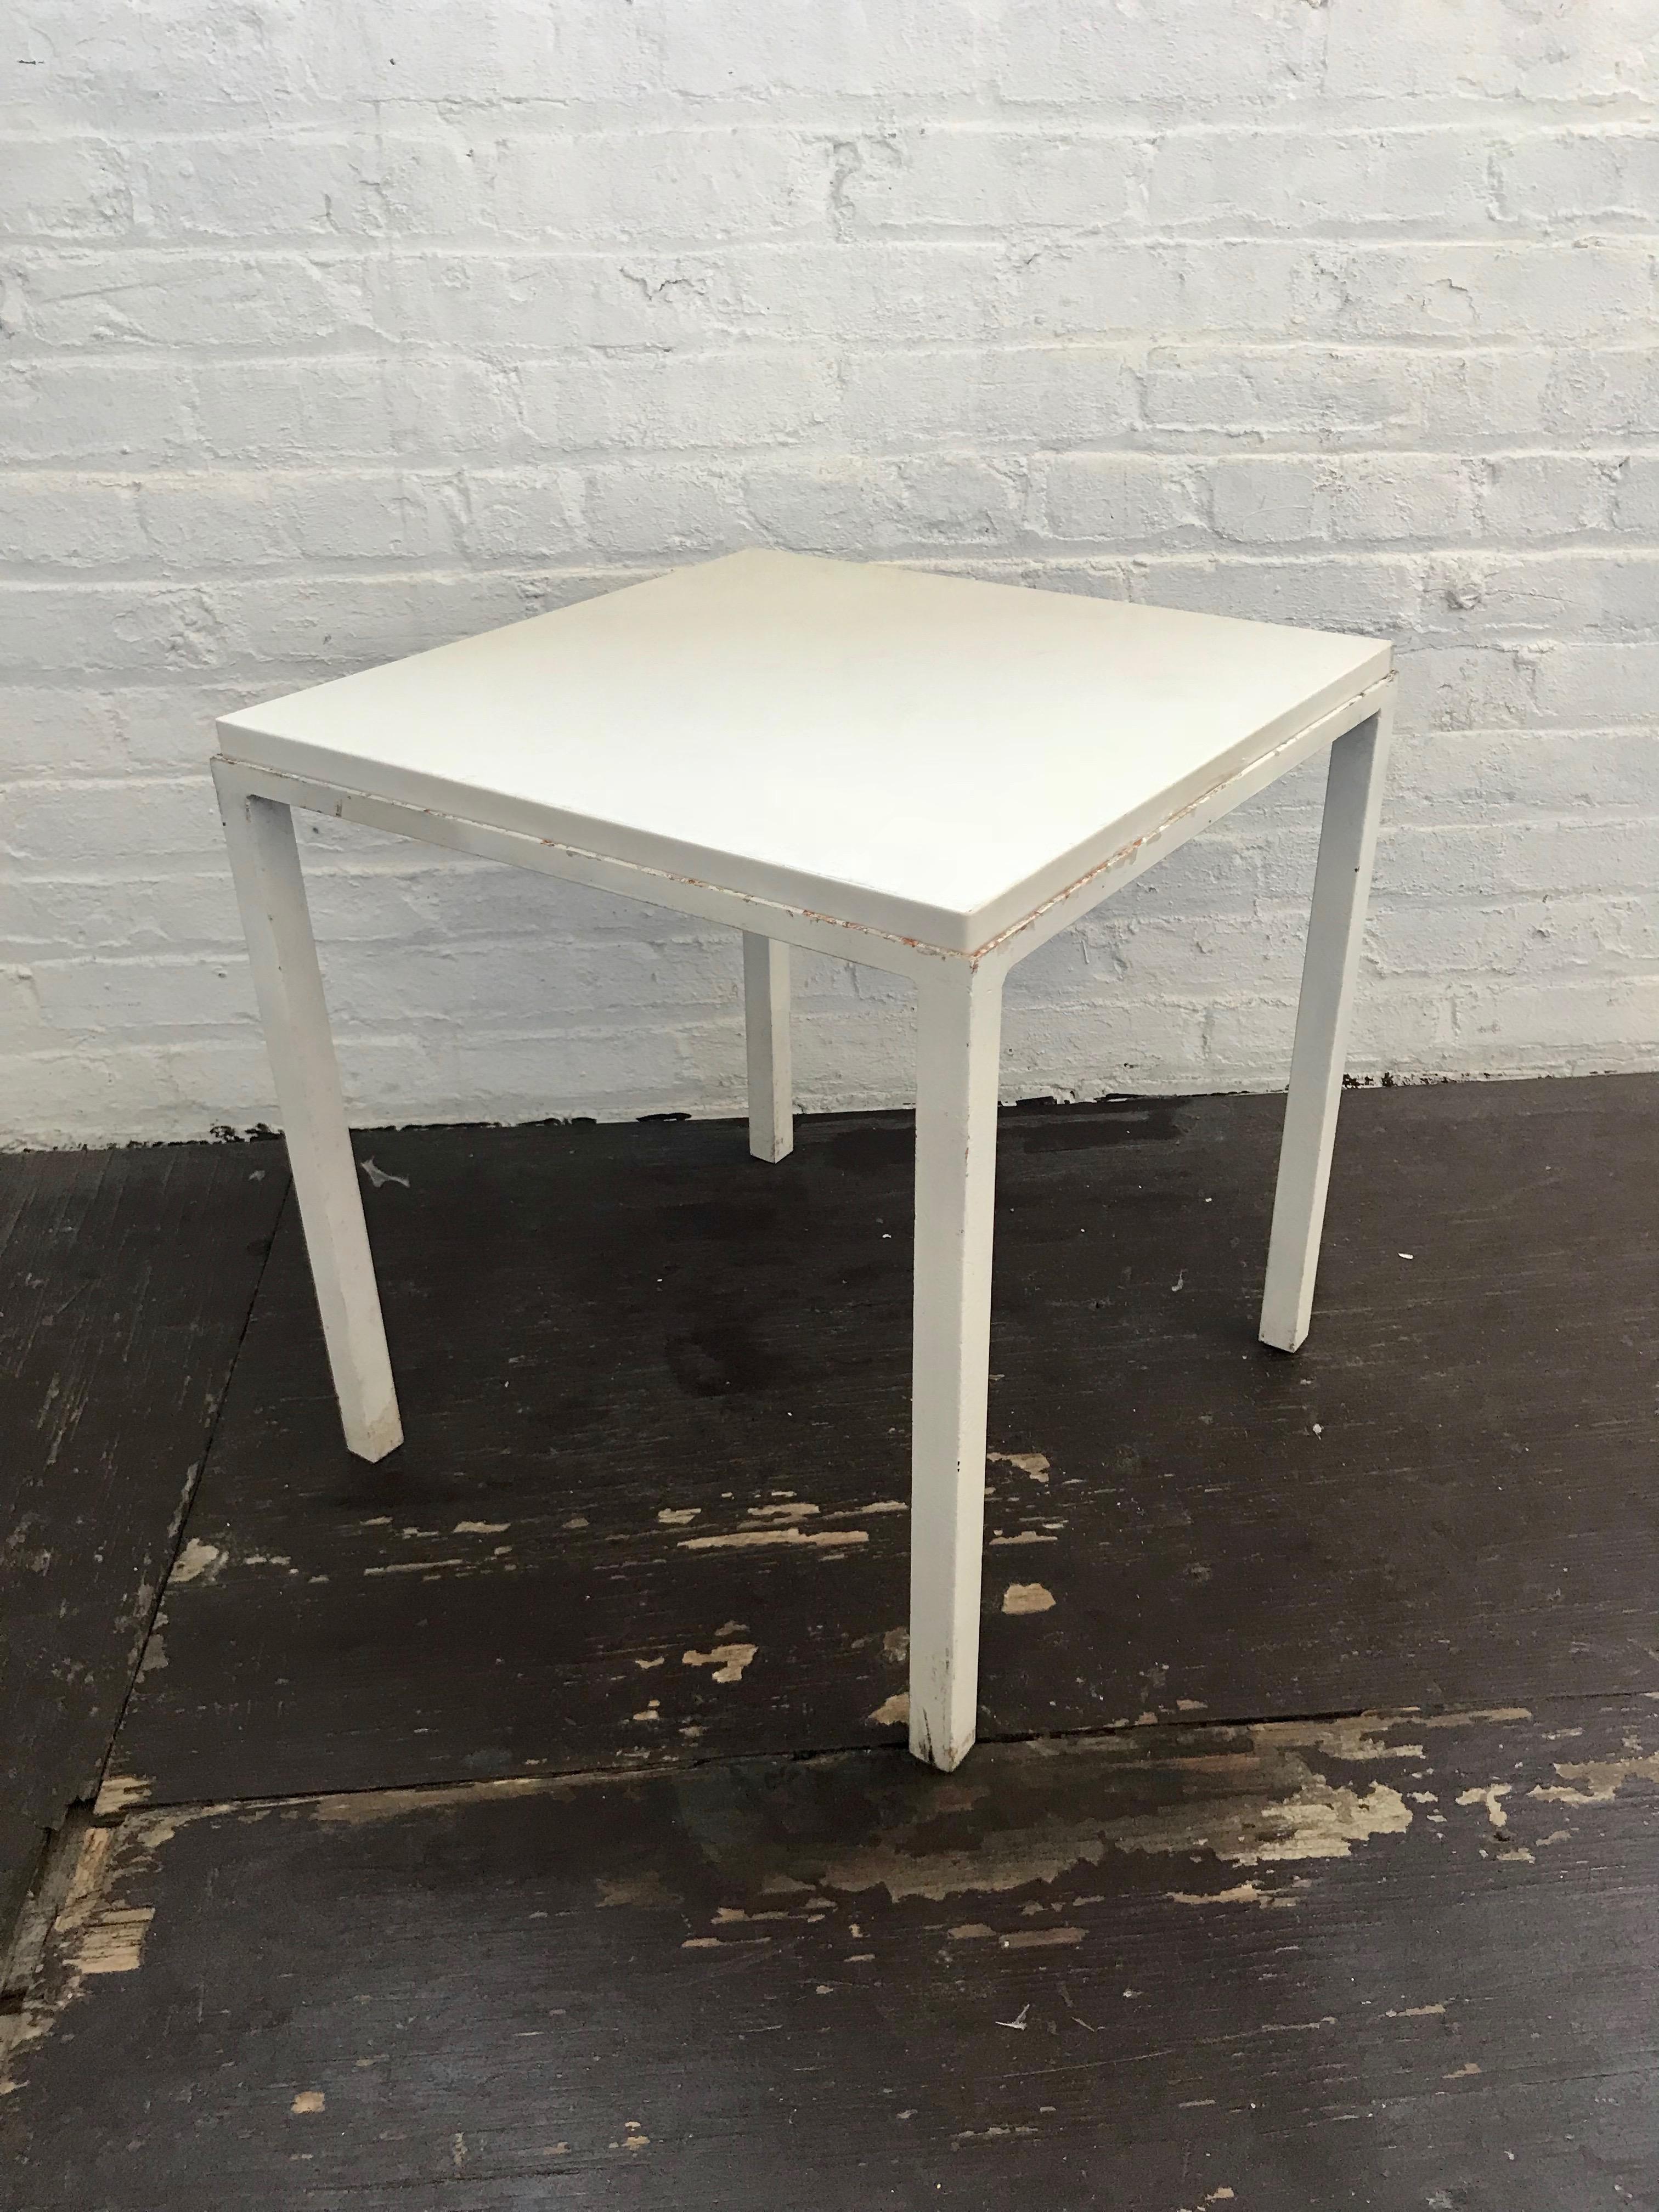 Pair of White Enameled Metal and Granite Side Tables, USA, circa 1955 For Sale 11